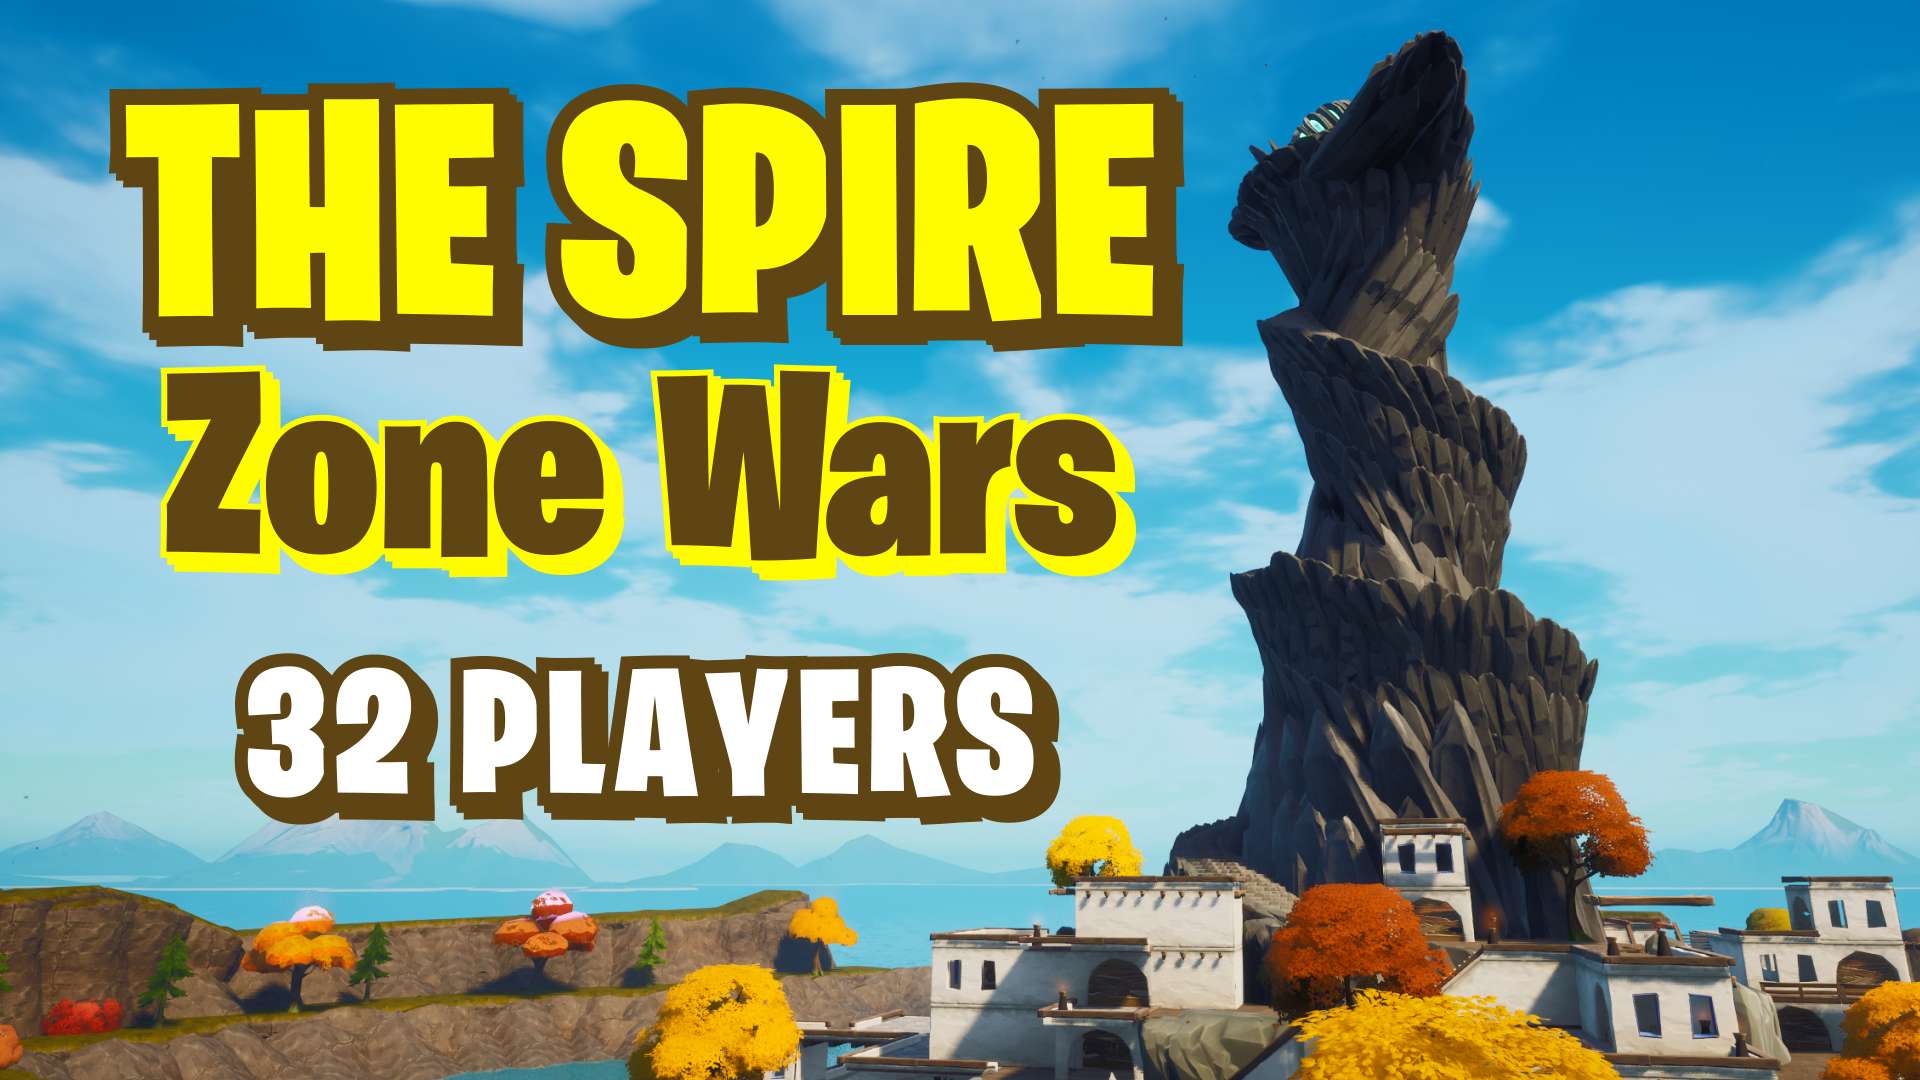 THE SPIRE ZONE WARS (32 PLAYERS) KALEL